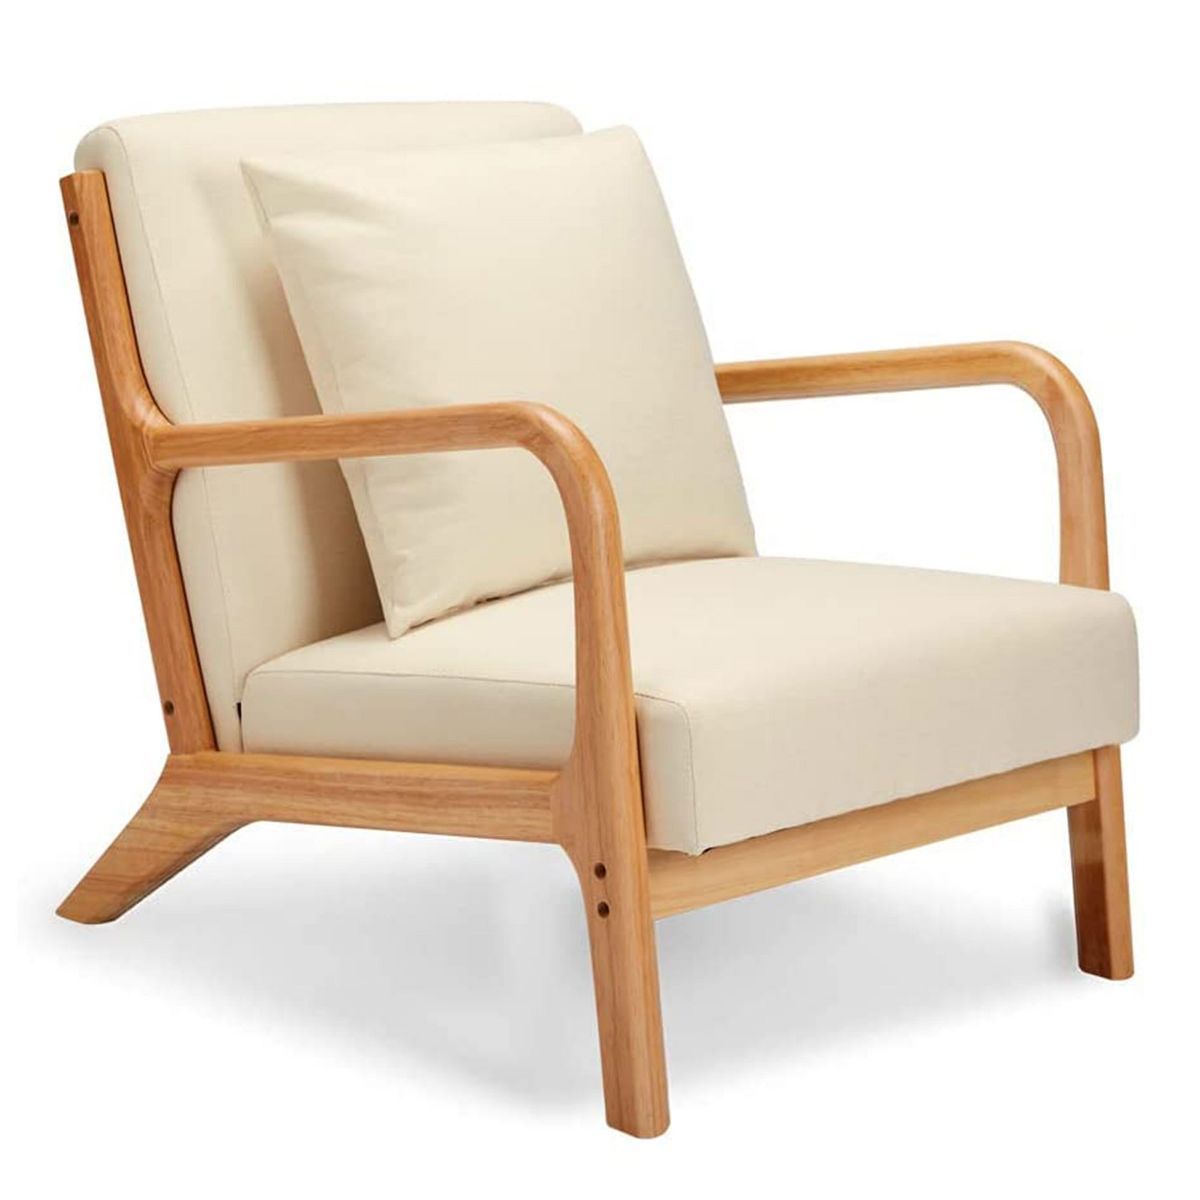 Jomeed Oak Wood Frame and Linen Upholstery Mid Century Modern Accent and Leisure Chair - Beige | Target